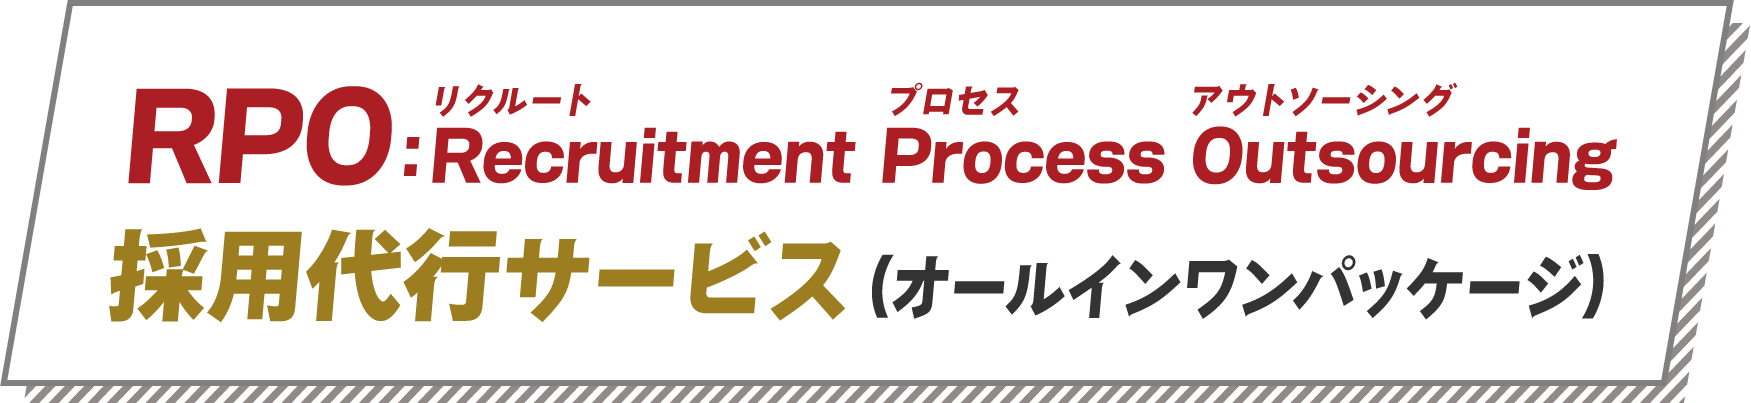 PRO:Recruitmentリクルート Processプロセス Outsourcingアウトソーシング
            採用代行サービス（オールインワンパッケージ）